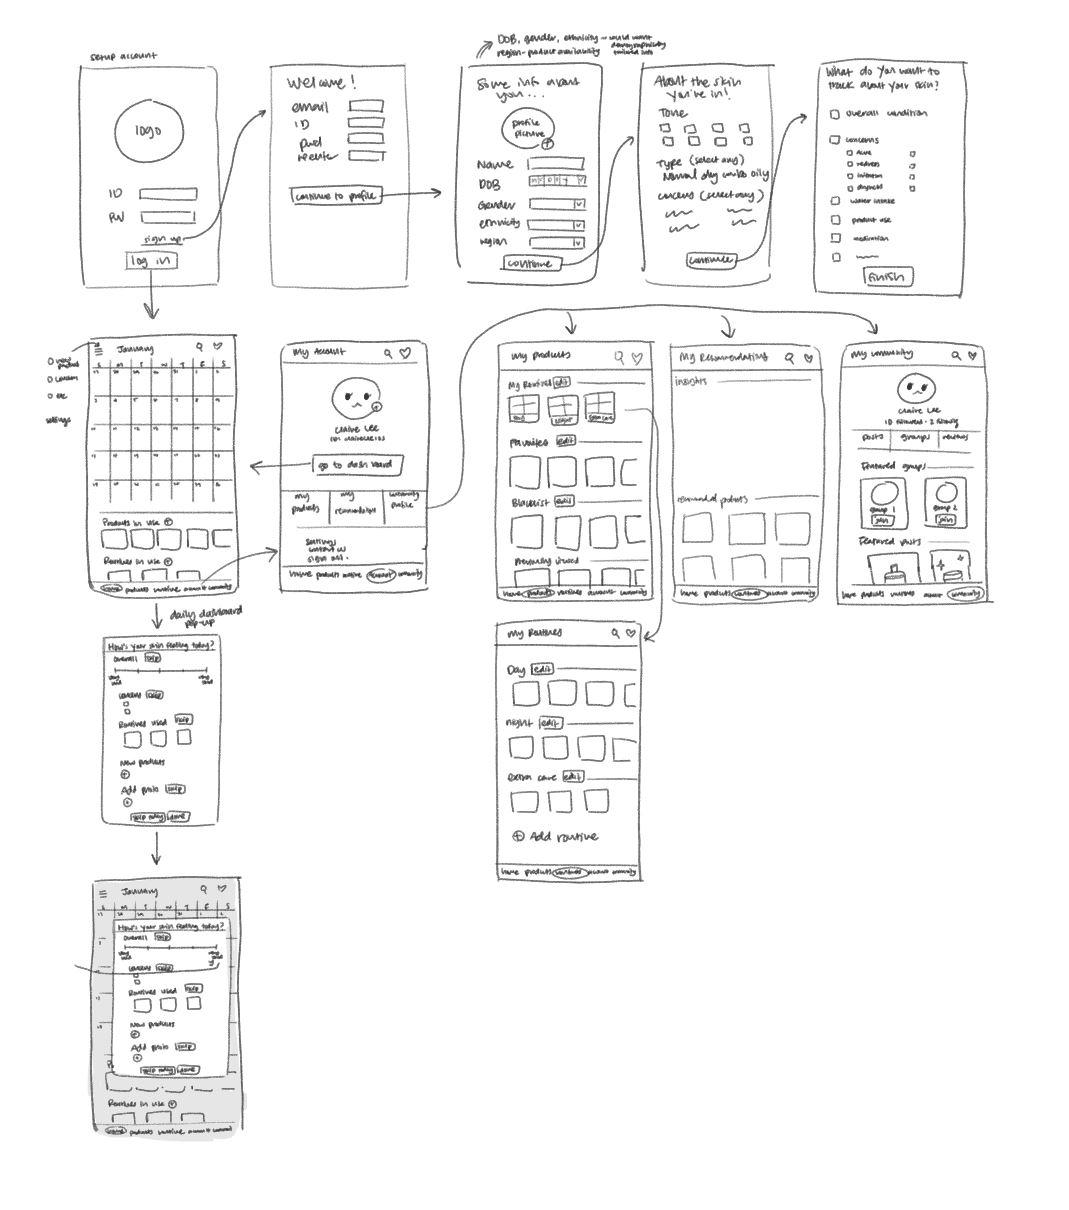 initial wireframe sample